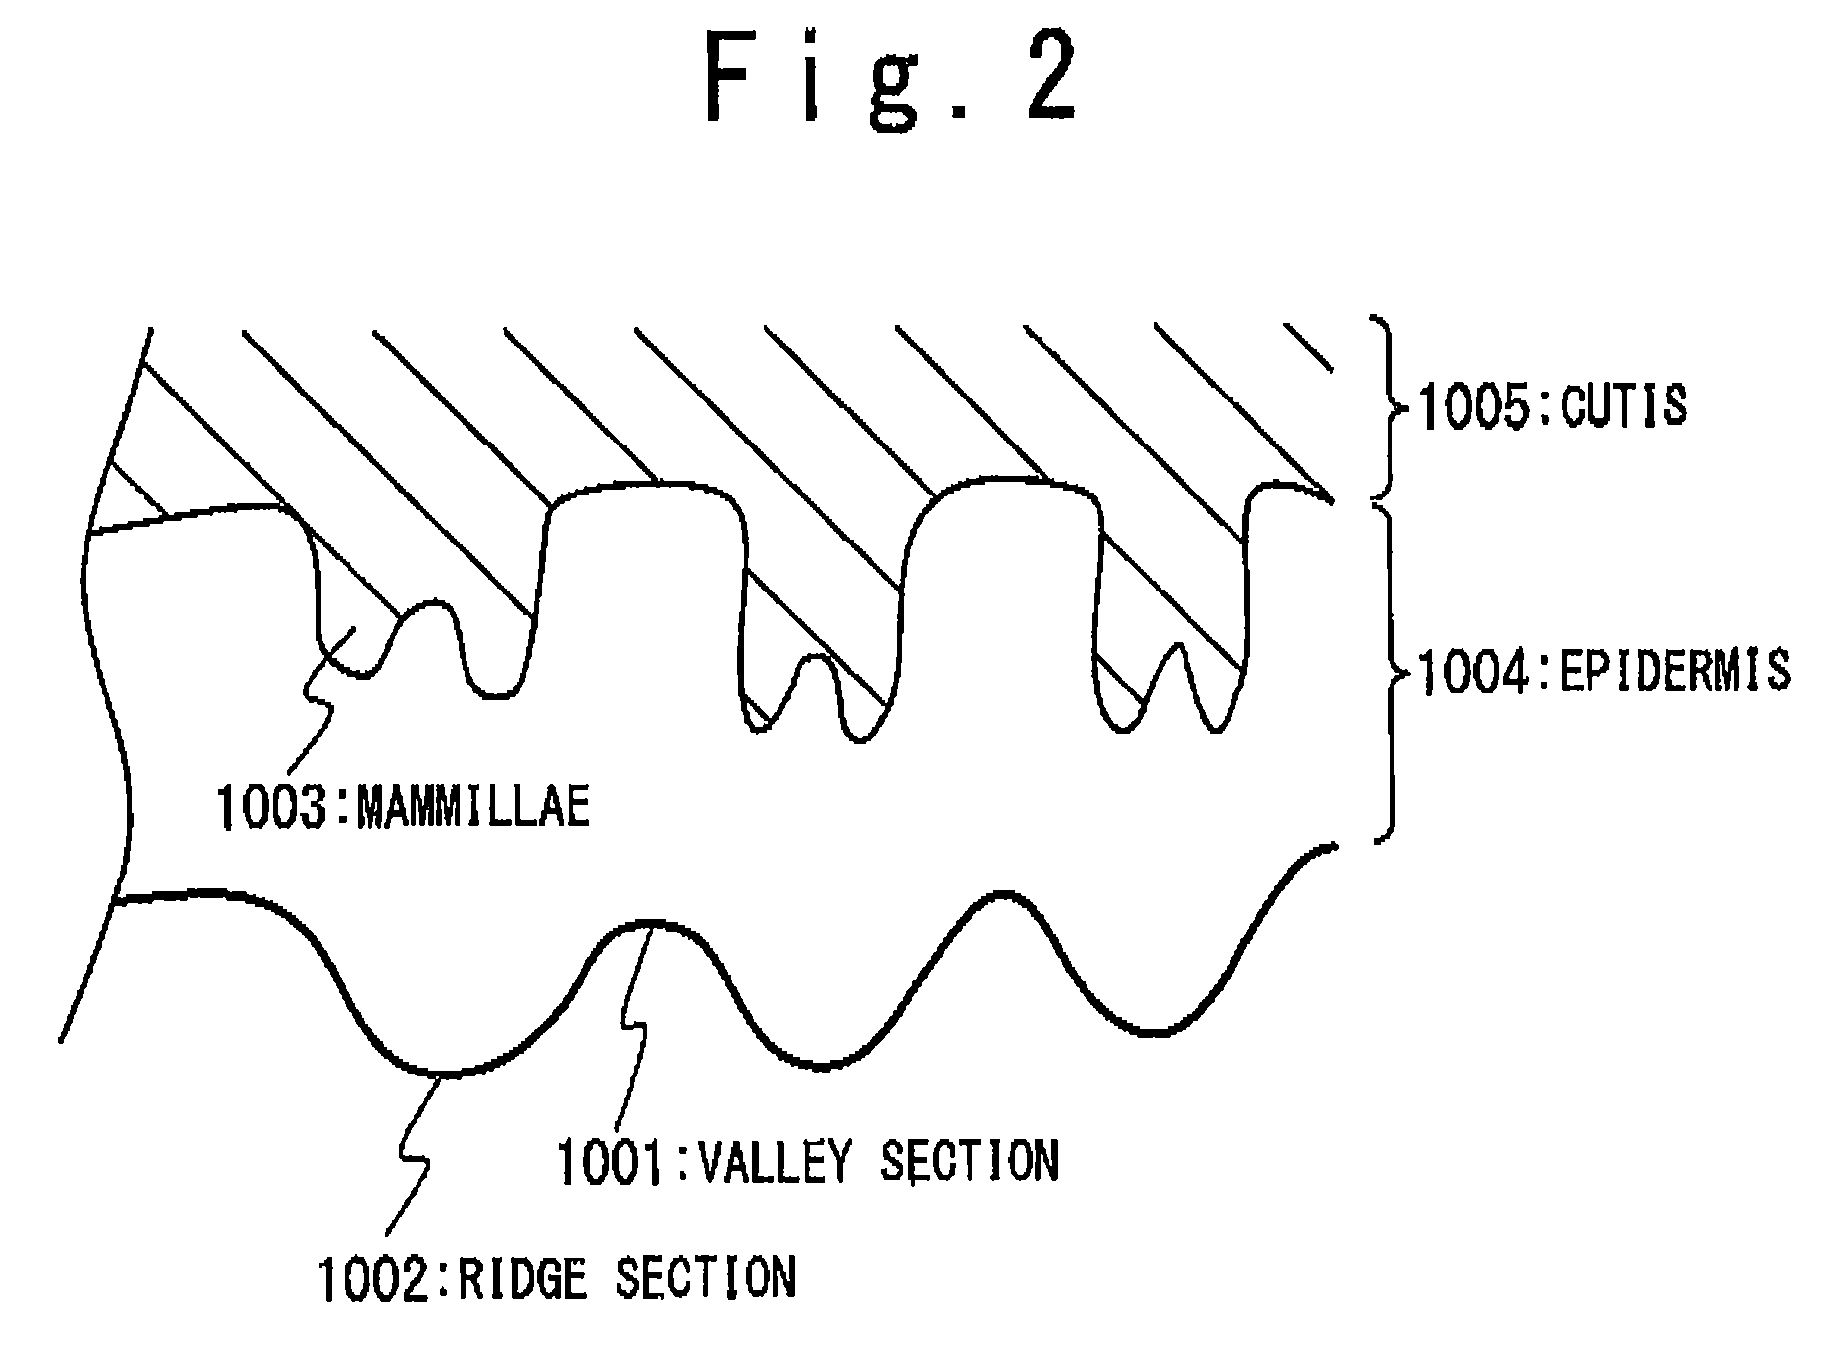 Image reading apparatus for feature image of live body